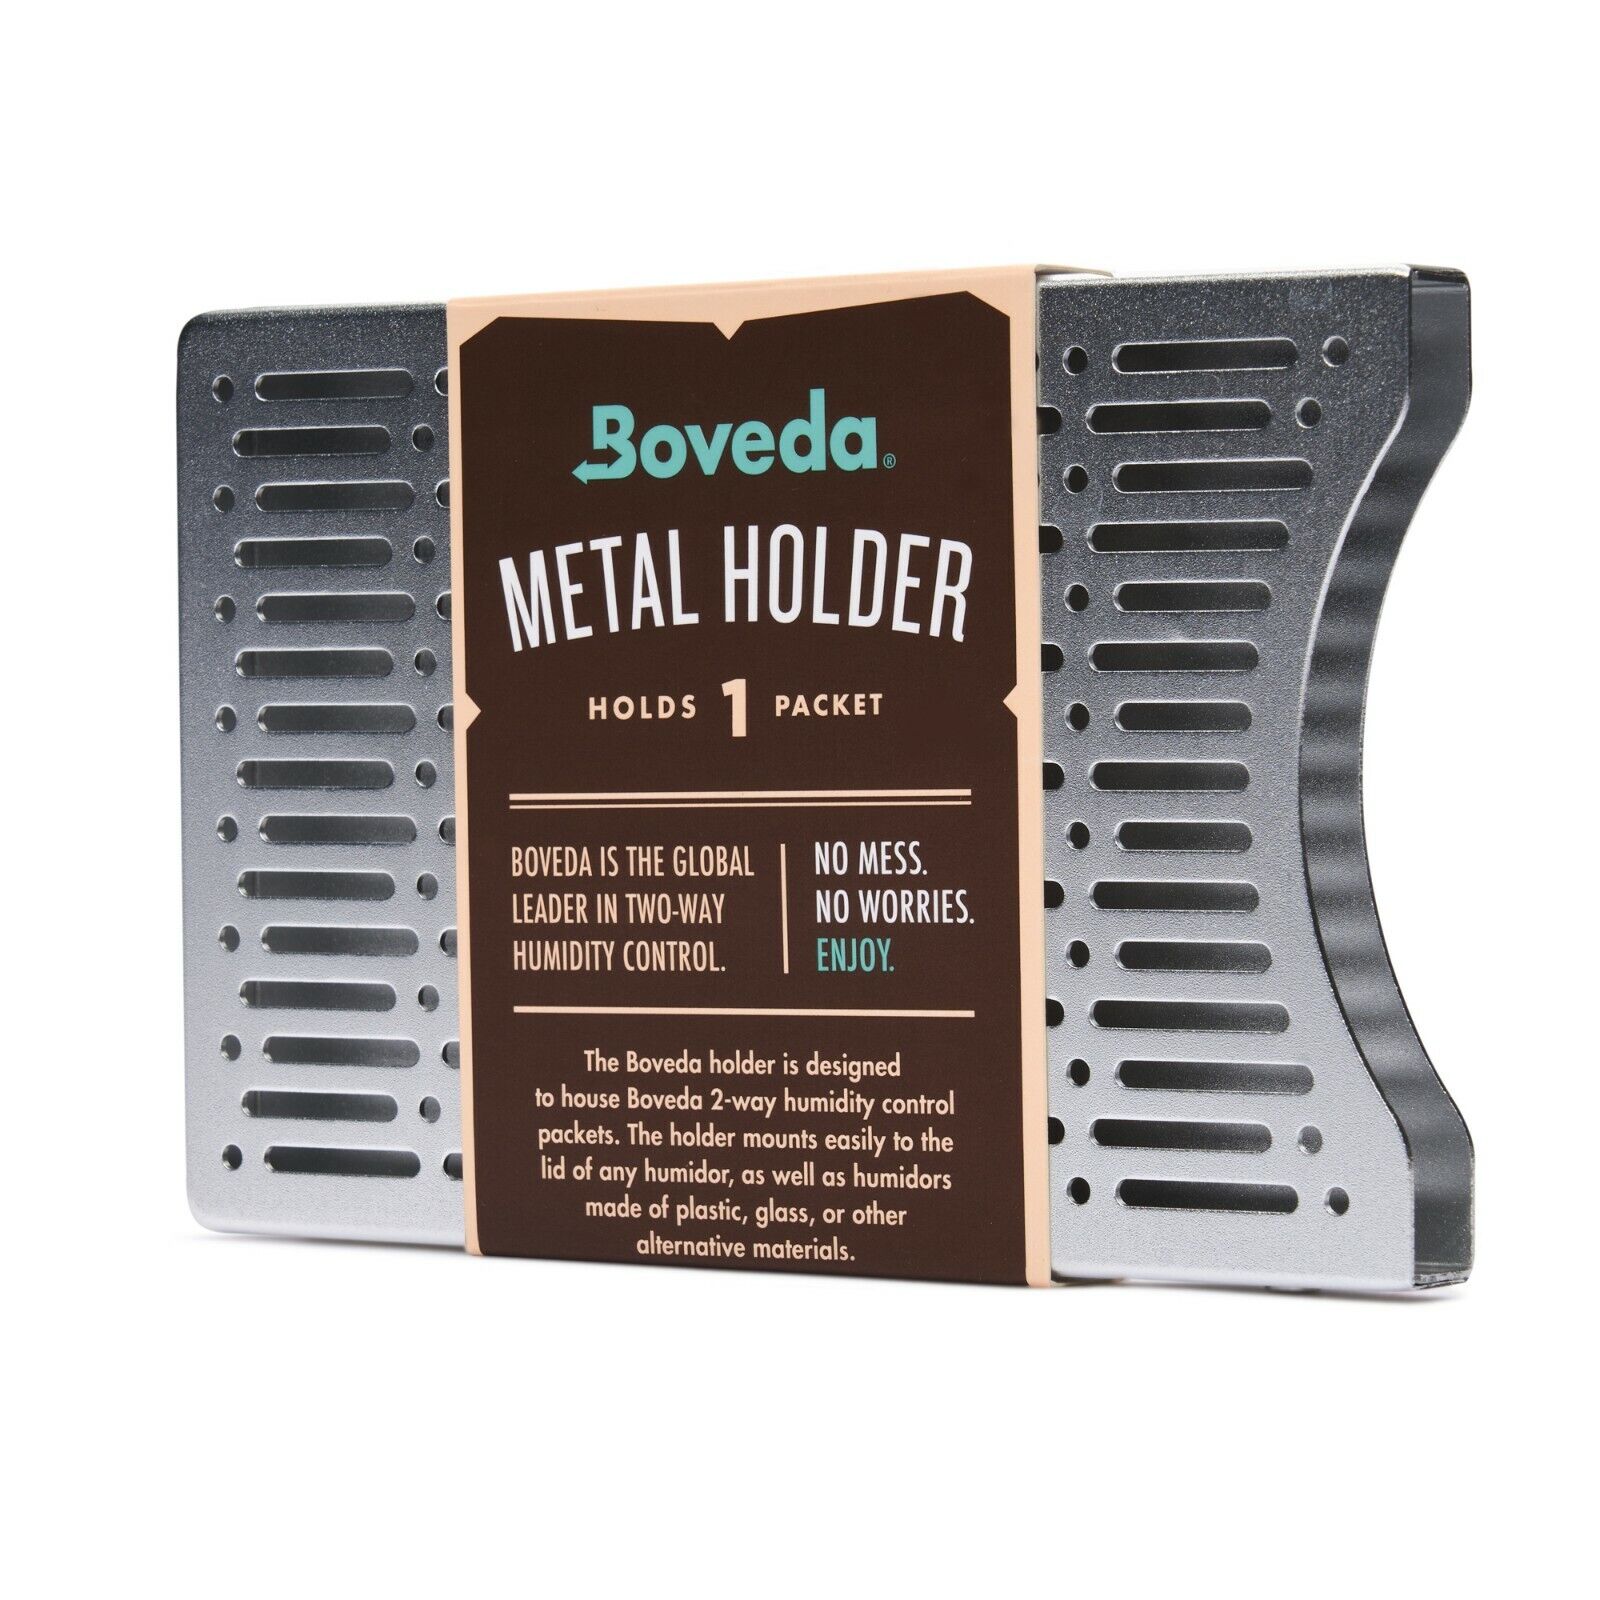 Boveda Aluminum Holder for Humidor - Space Saving - Use With One Size 60 Pack